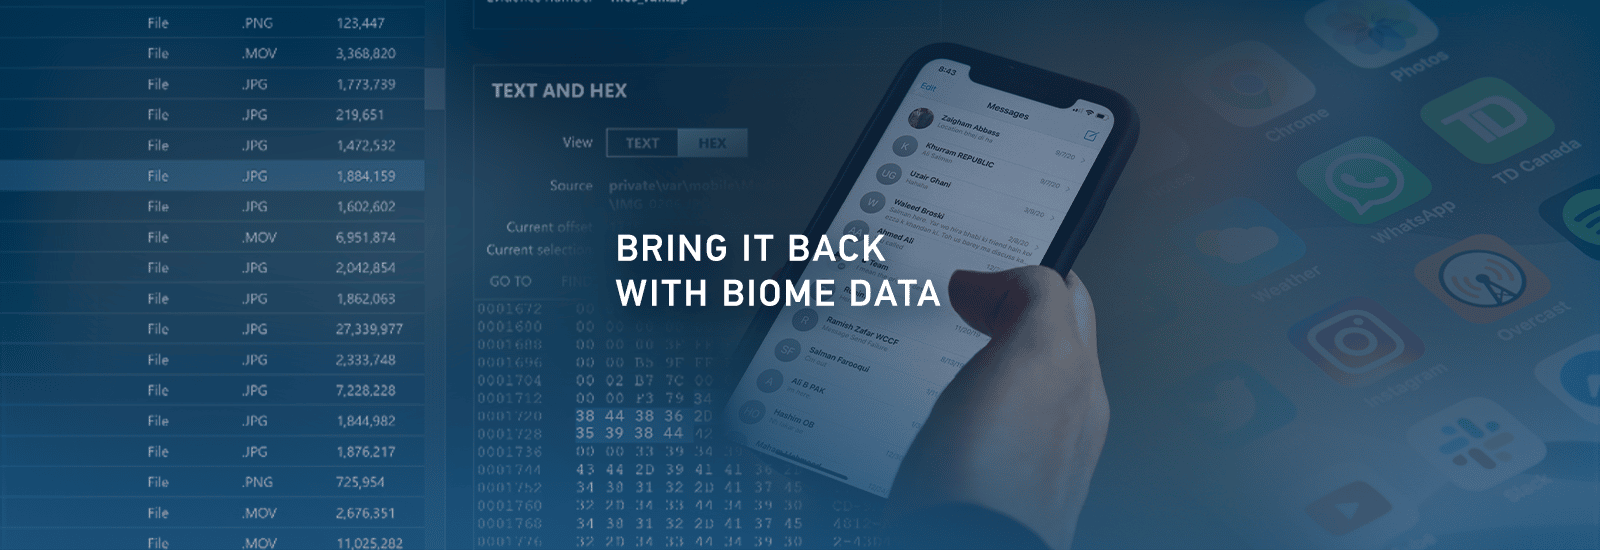 Bring It Back With Biome Data